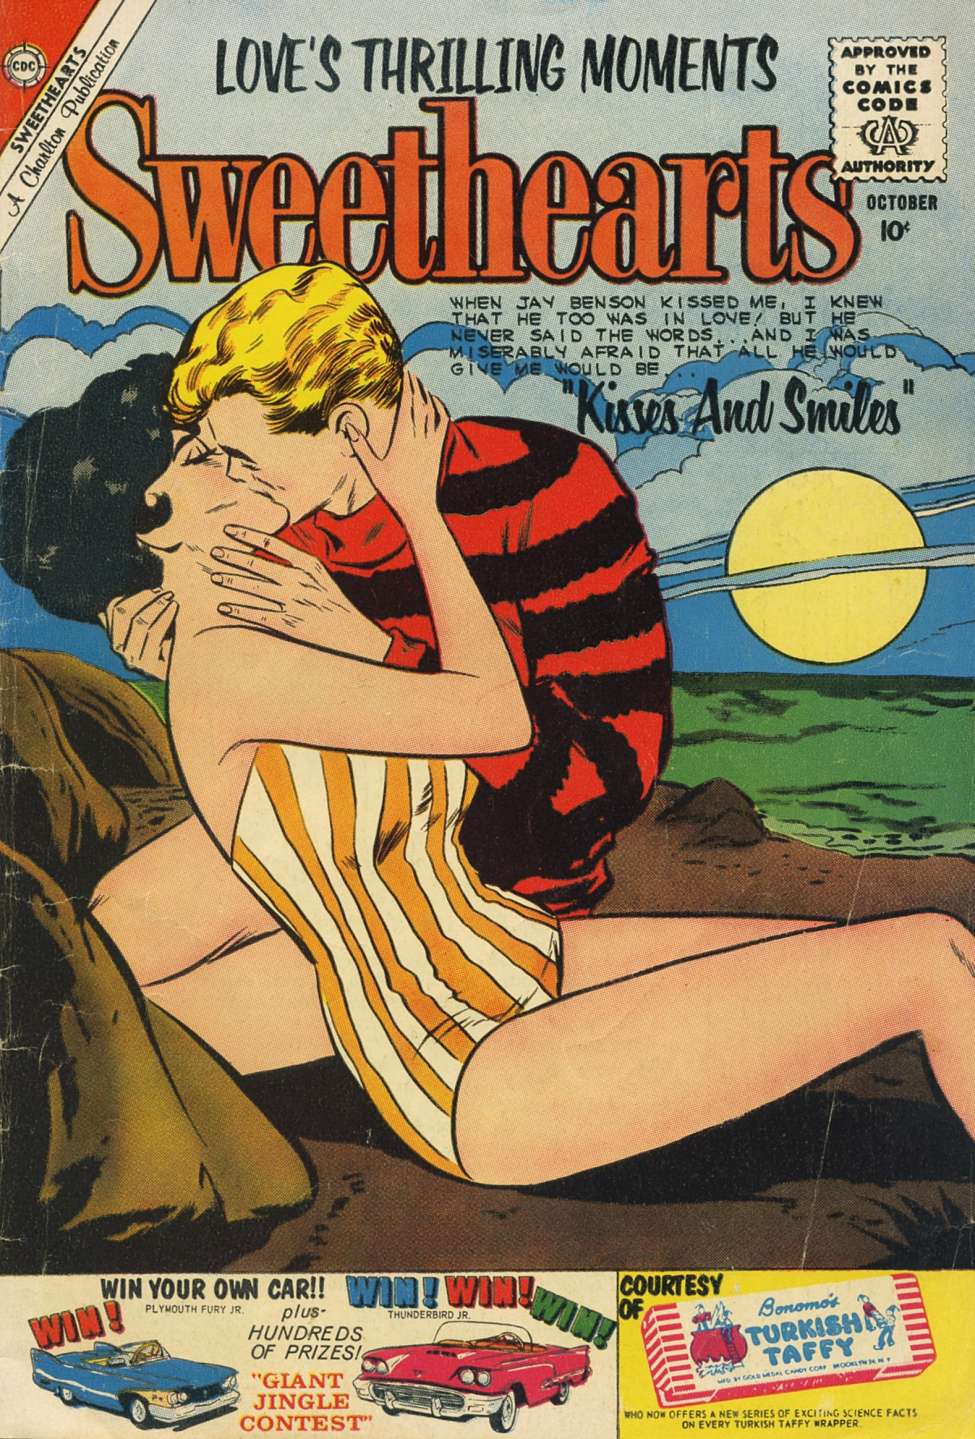 Book Cover For Sweethearts 56